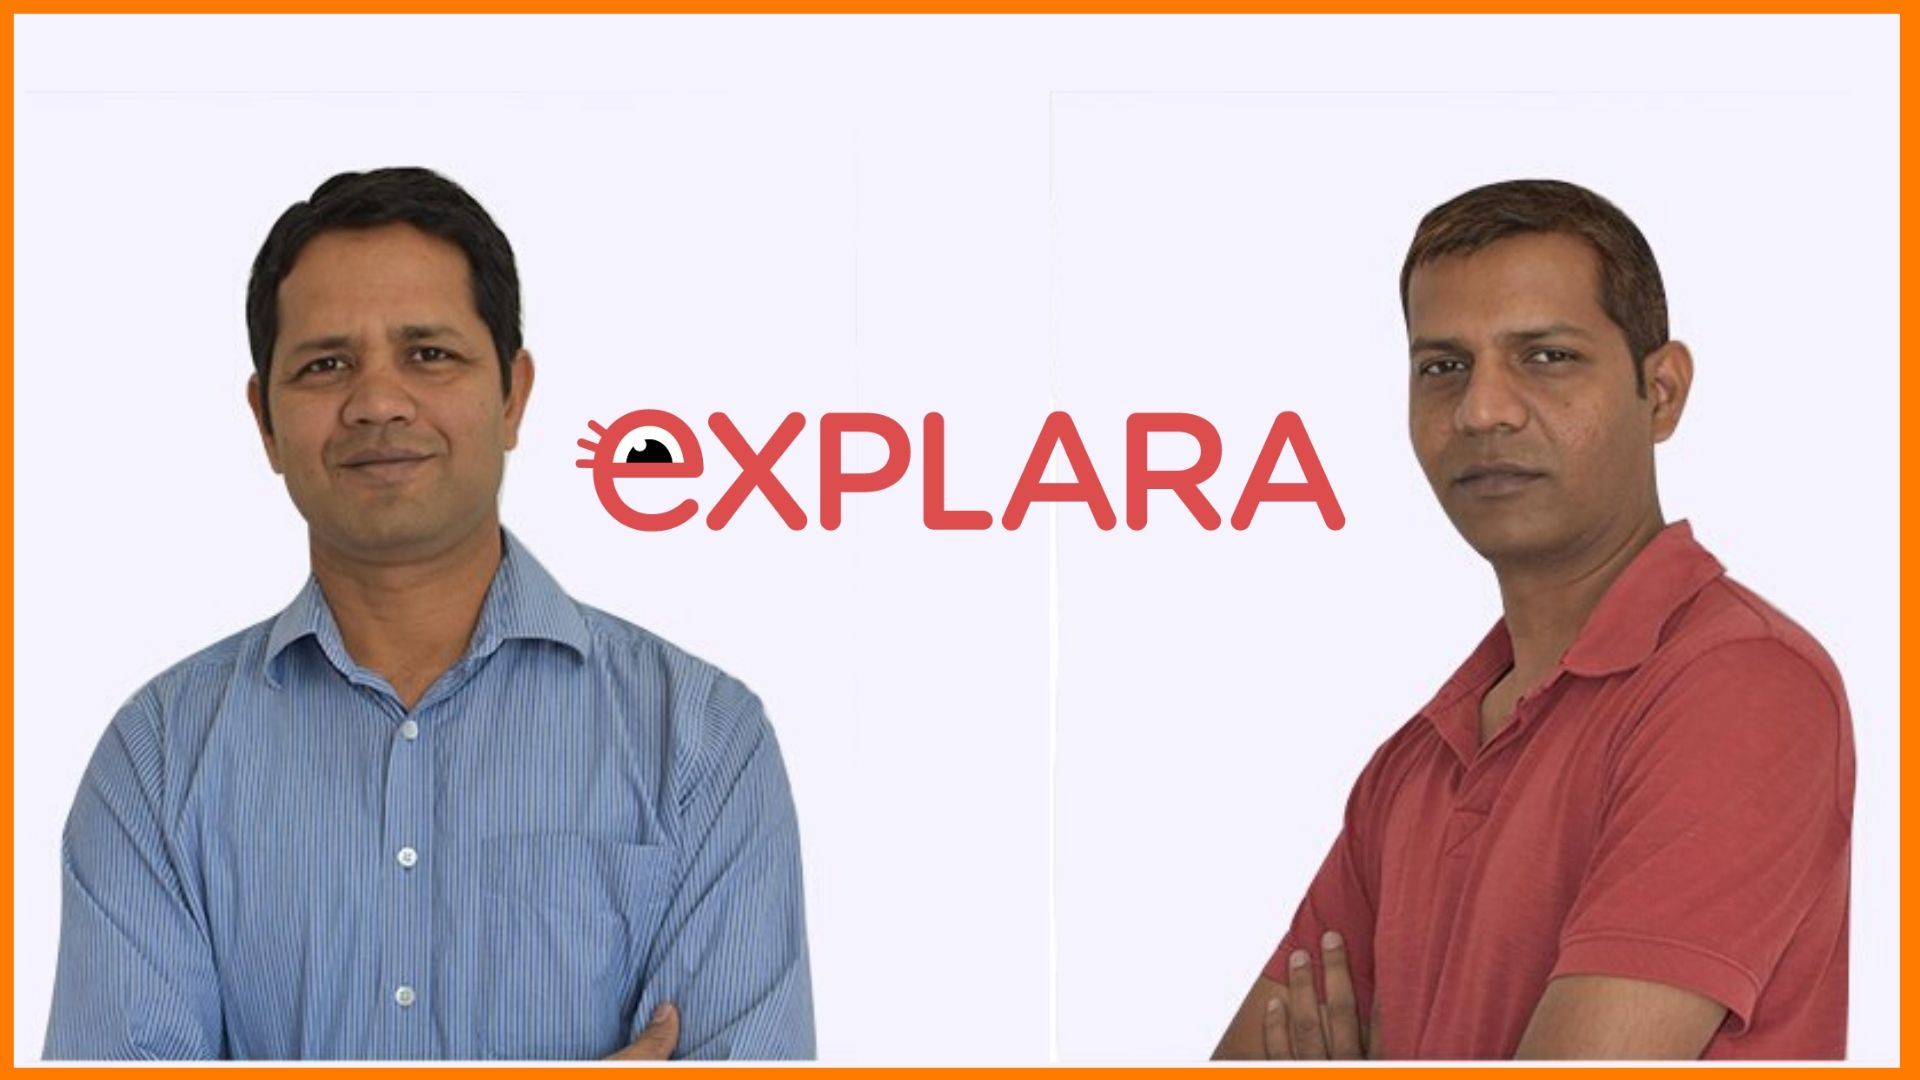 Explara - Helping Startups in Monetizing and Generating Audience for their Events!